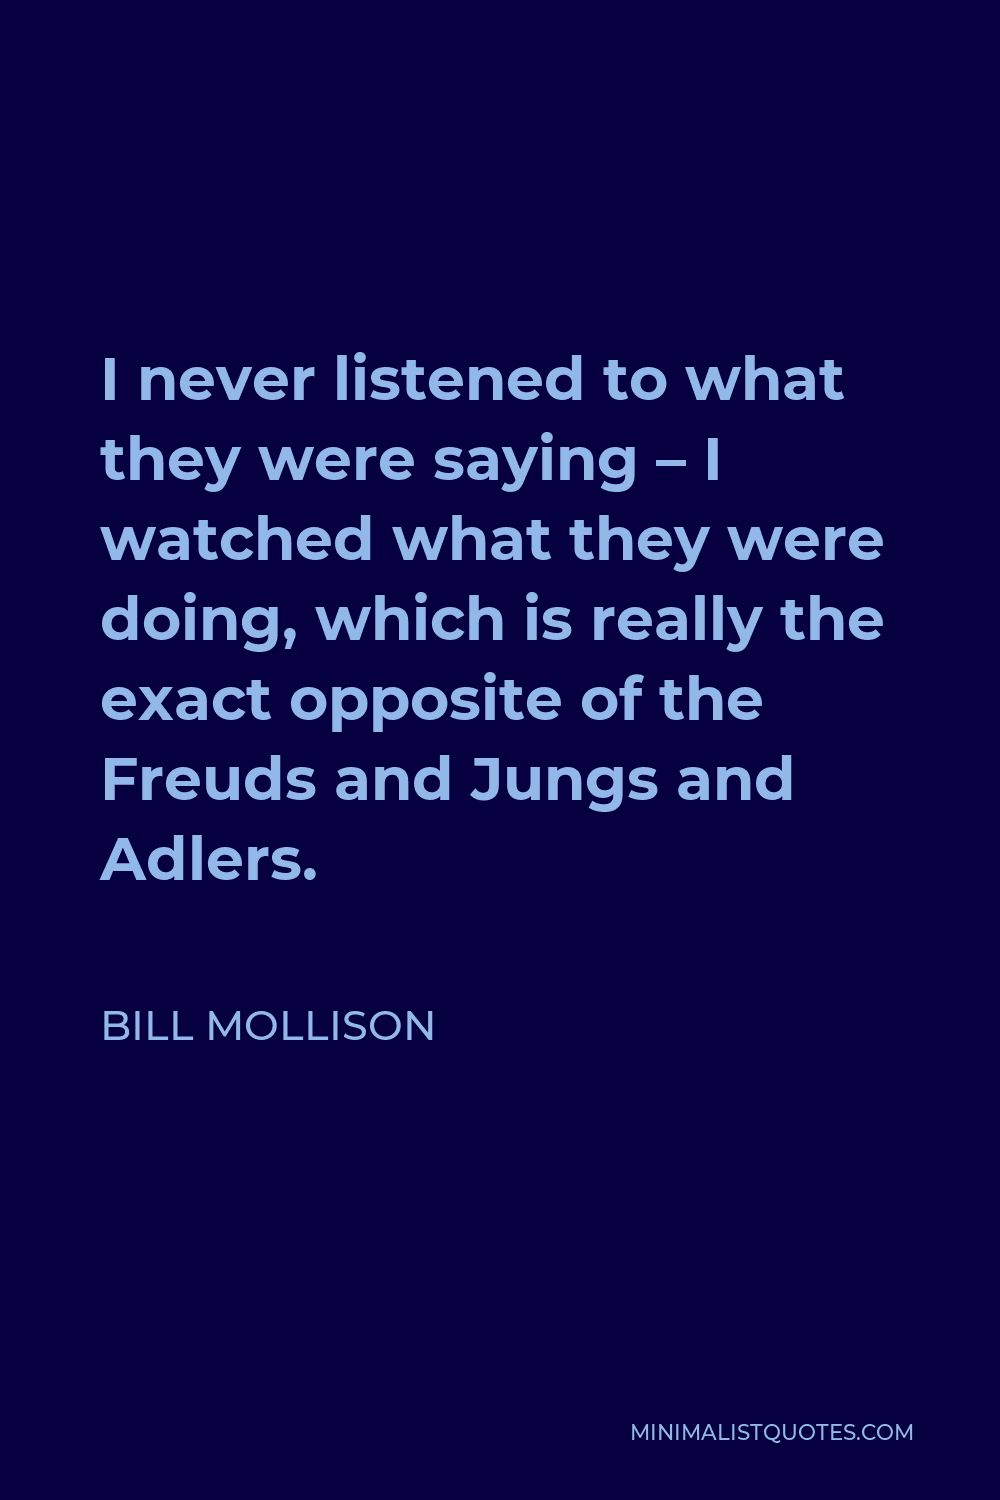 Bill Mollison Quote - I never listened to what they were saying – I watched what they were doing, which is really the exact opposite of the Freuds and Jungs and Adlers.